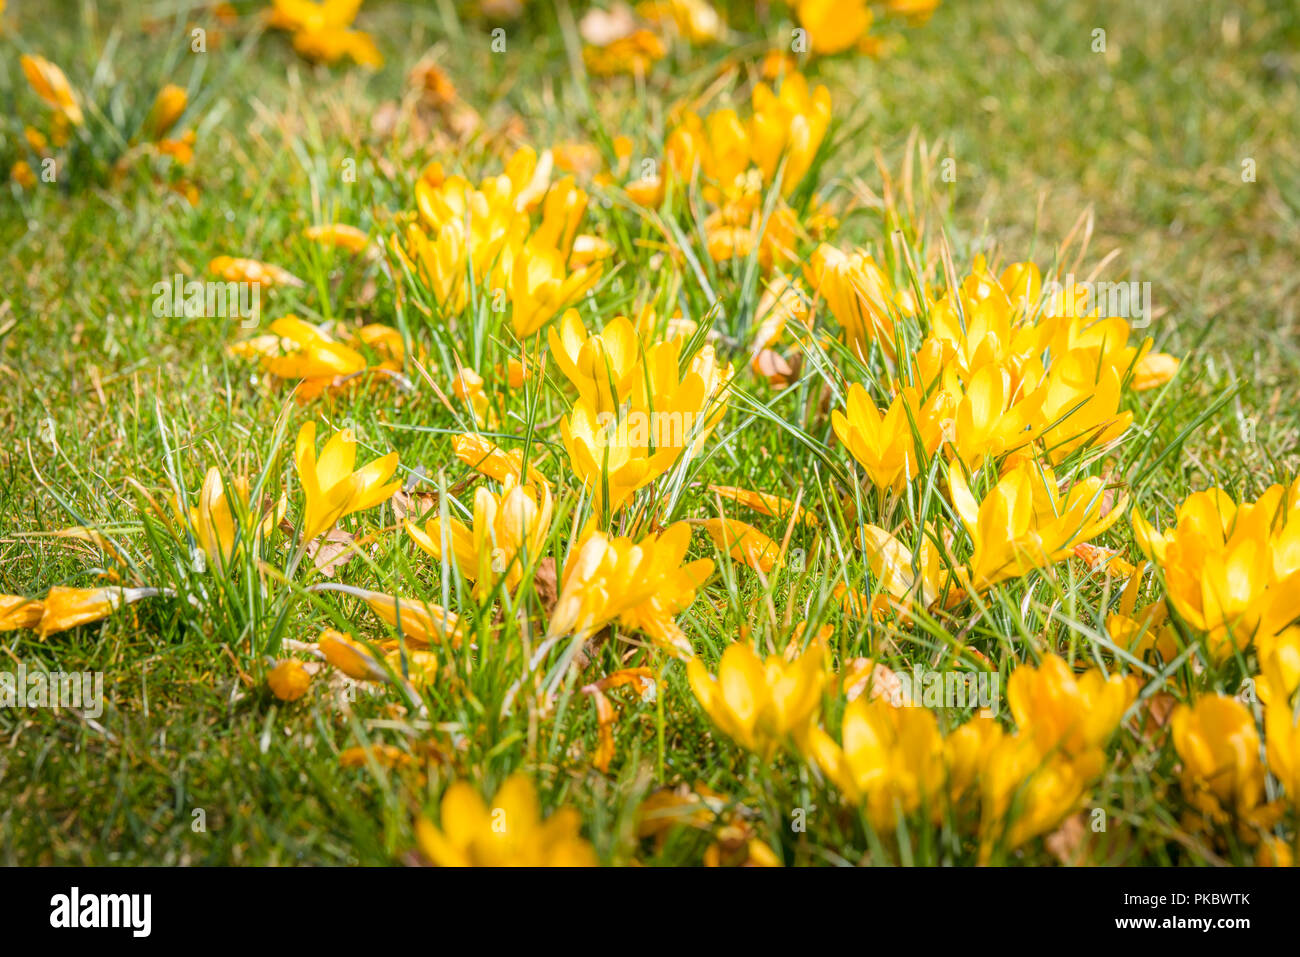 Springtime Crocus Flowers In Yellow Colors On A Green Lawn In The Sun Early In The Spring Stock Photo Alamy